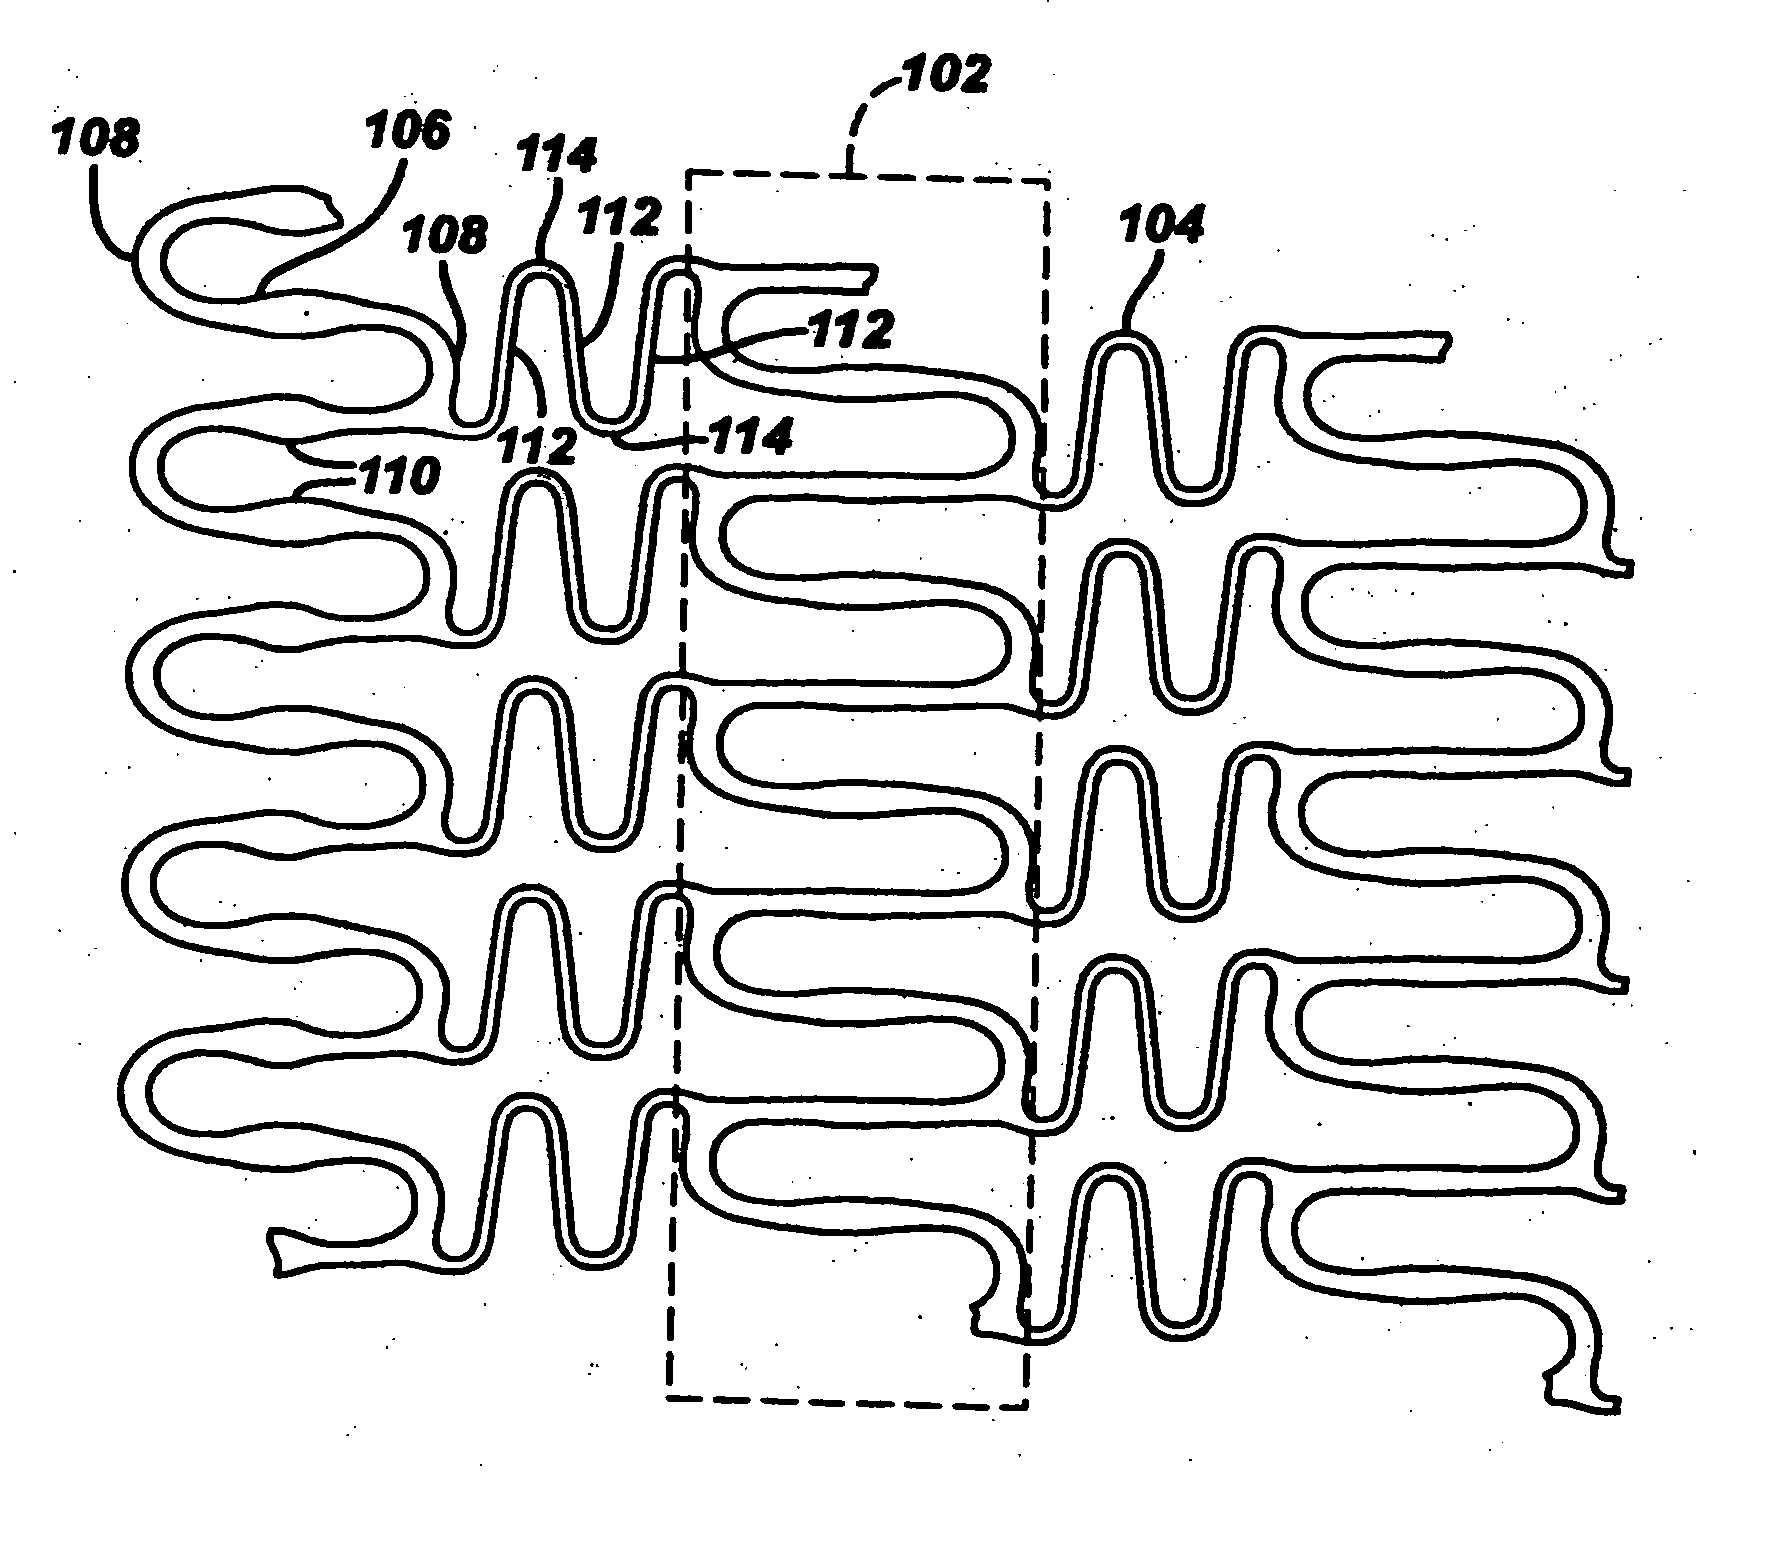 Polymeric stent having modified molecular structures in the flexible connectors and the radial arcs of the hoops